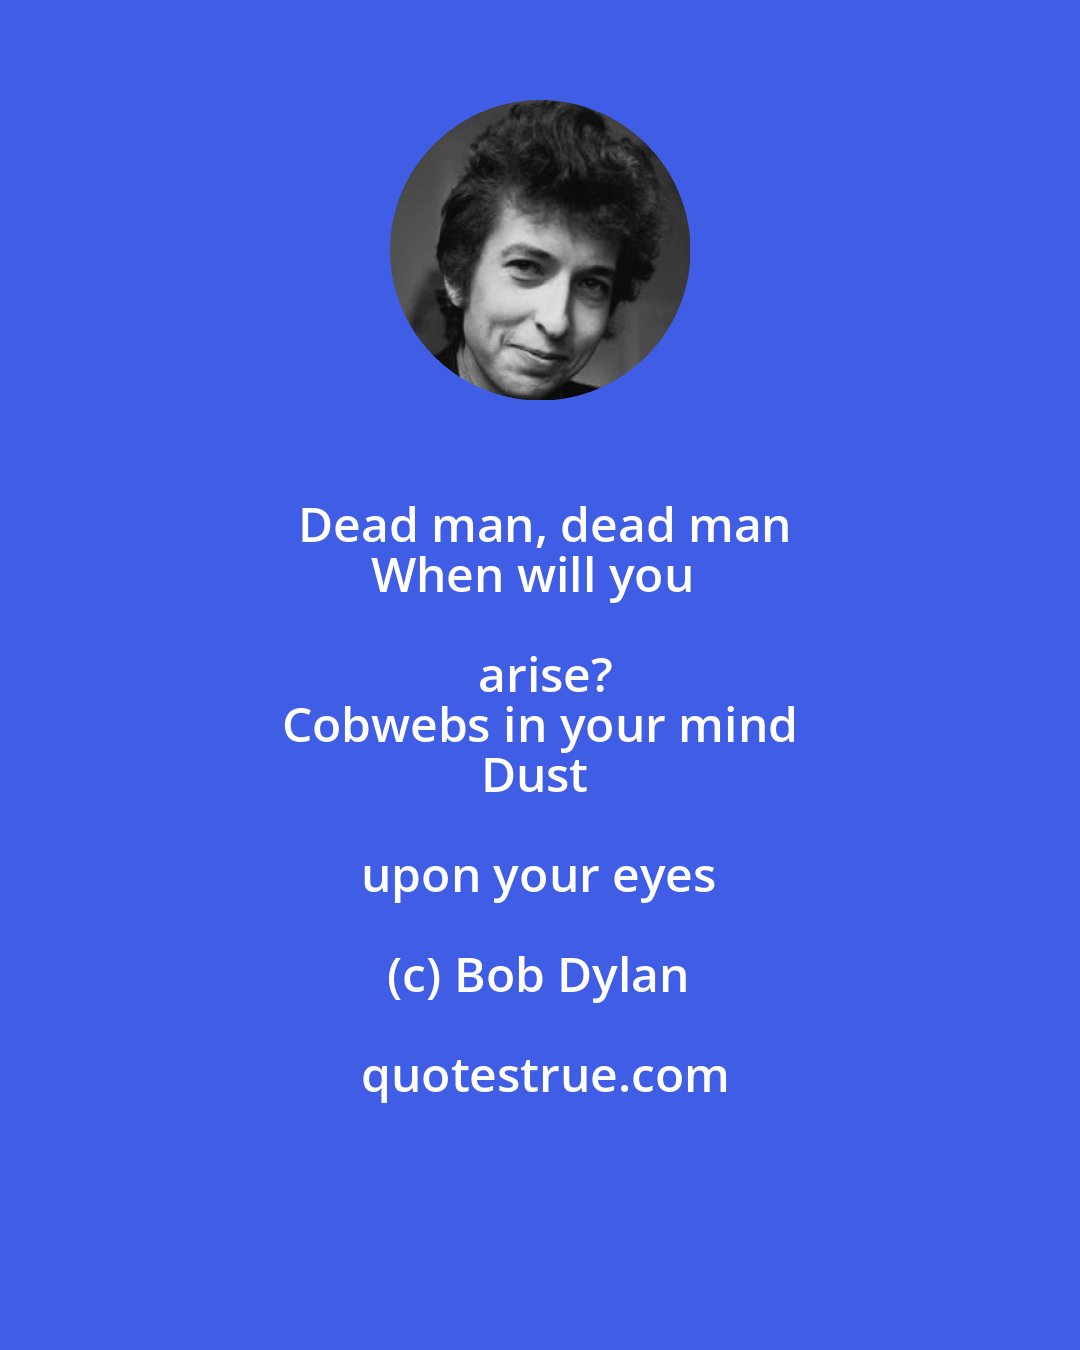 Bob Dylan: Dead man, dead man
When will you arise?
Cobwebs in your mind
Dust upon your eyes